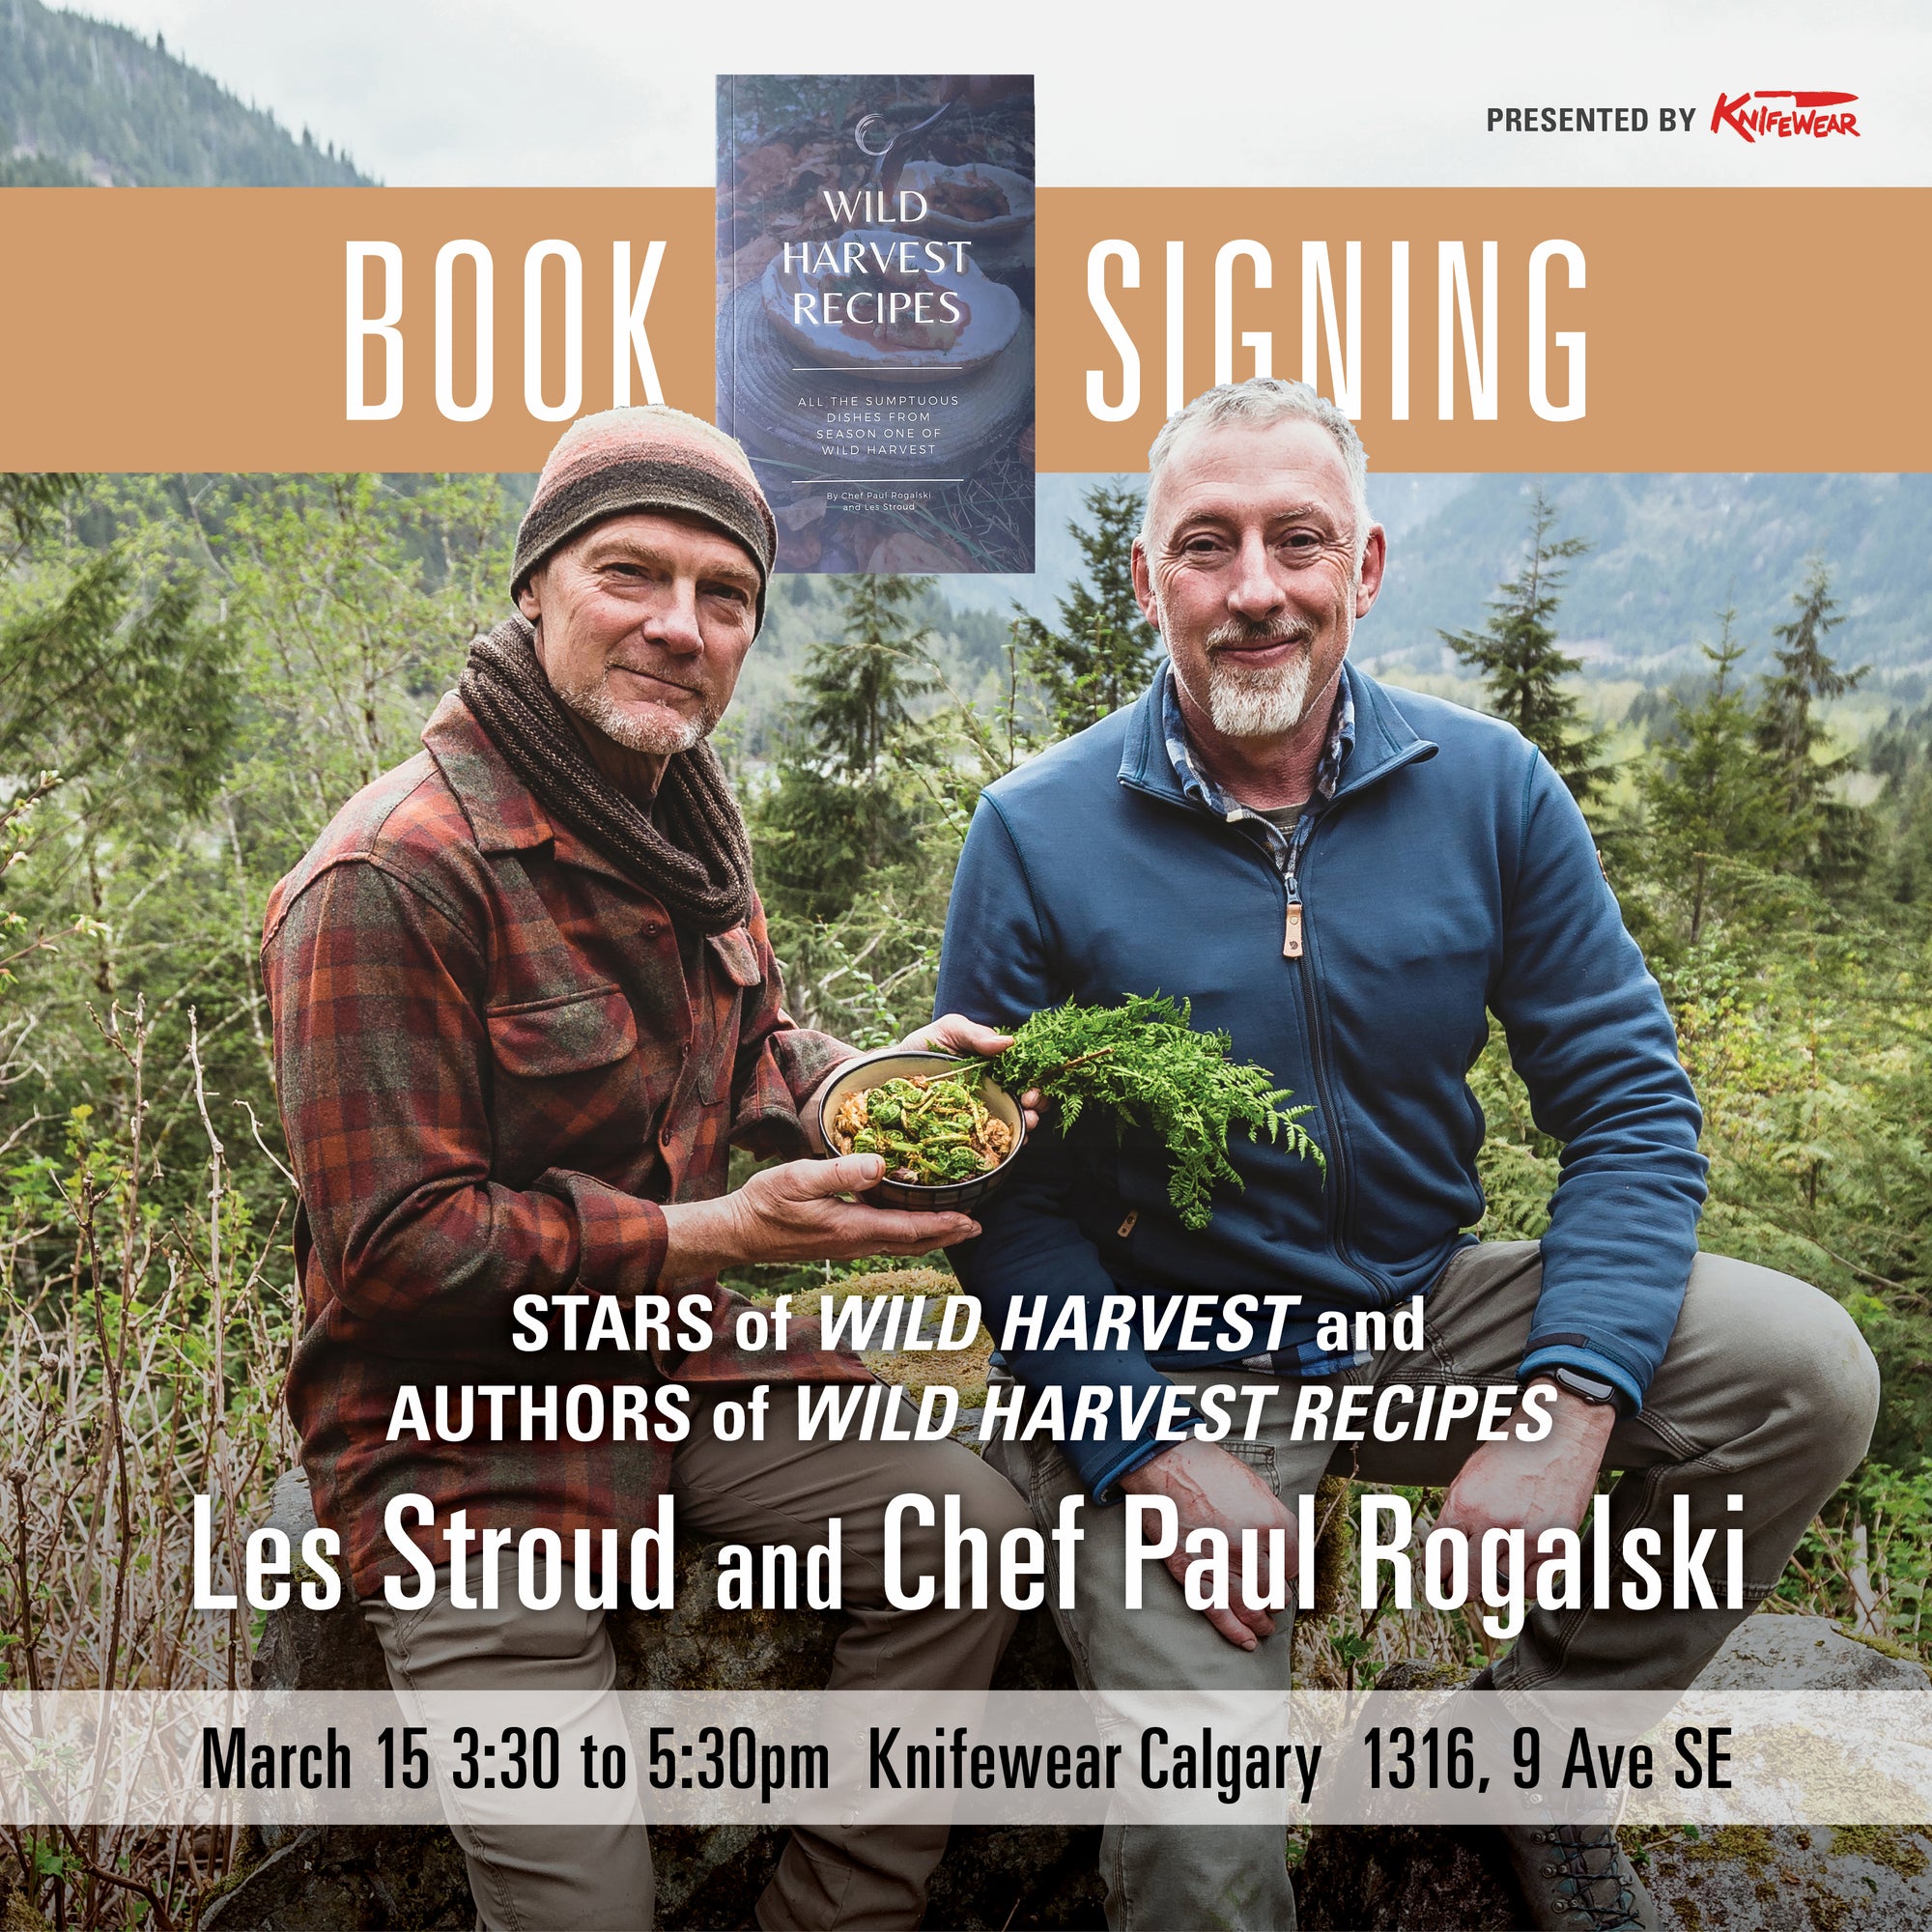 Book Signing with Chef Paul Rogalski & Les Stroud, Knifewear Calgary March 15